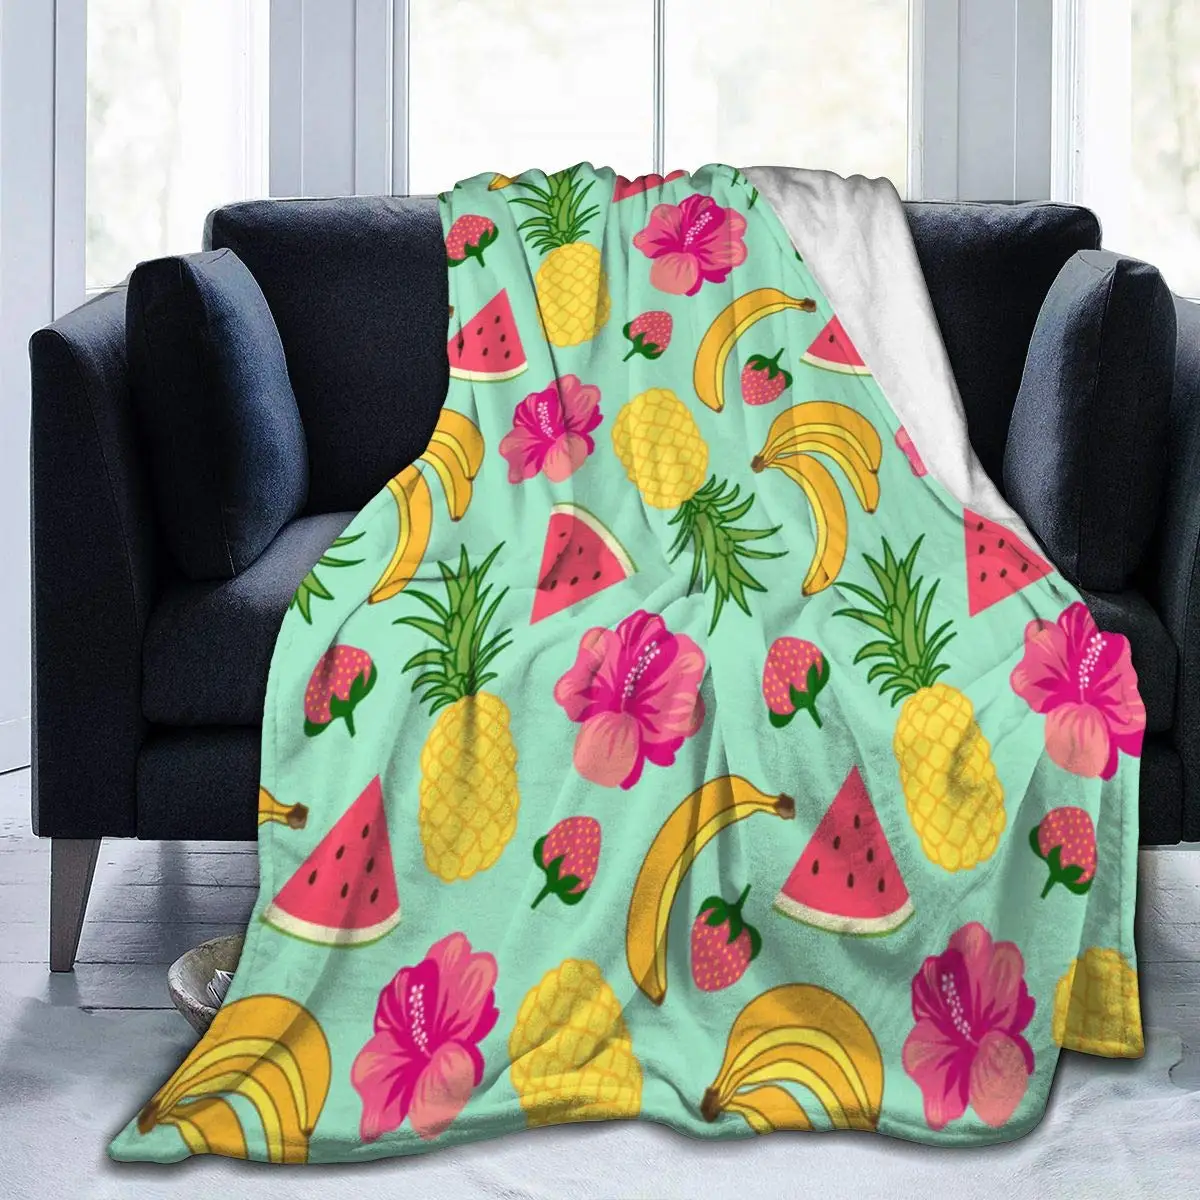 

Ultra Soft Light Weight Throw Blanket Tropical Fruit Floral Comfy Fluffy Quilt for Bed Couch Sofa Living Room Picnic Suitable